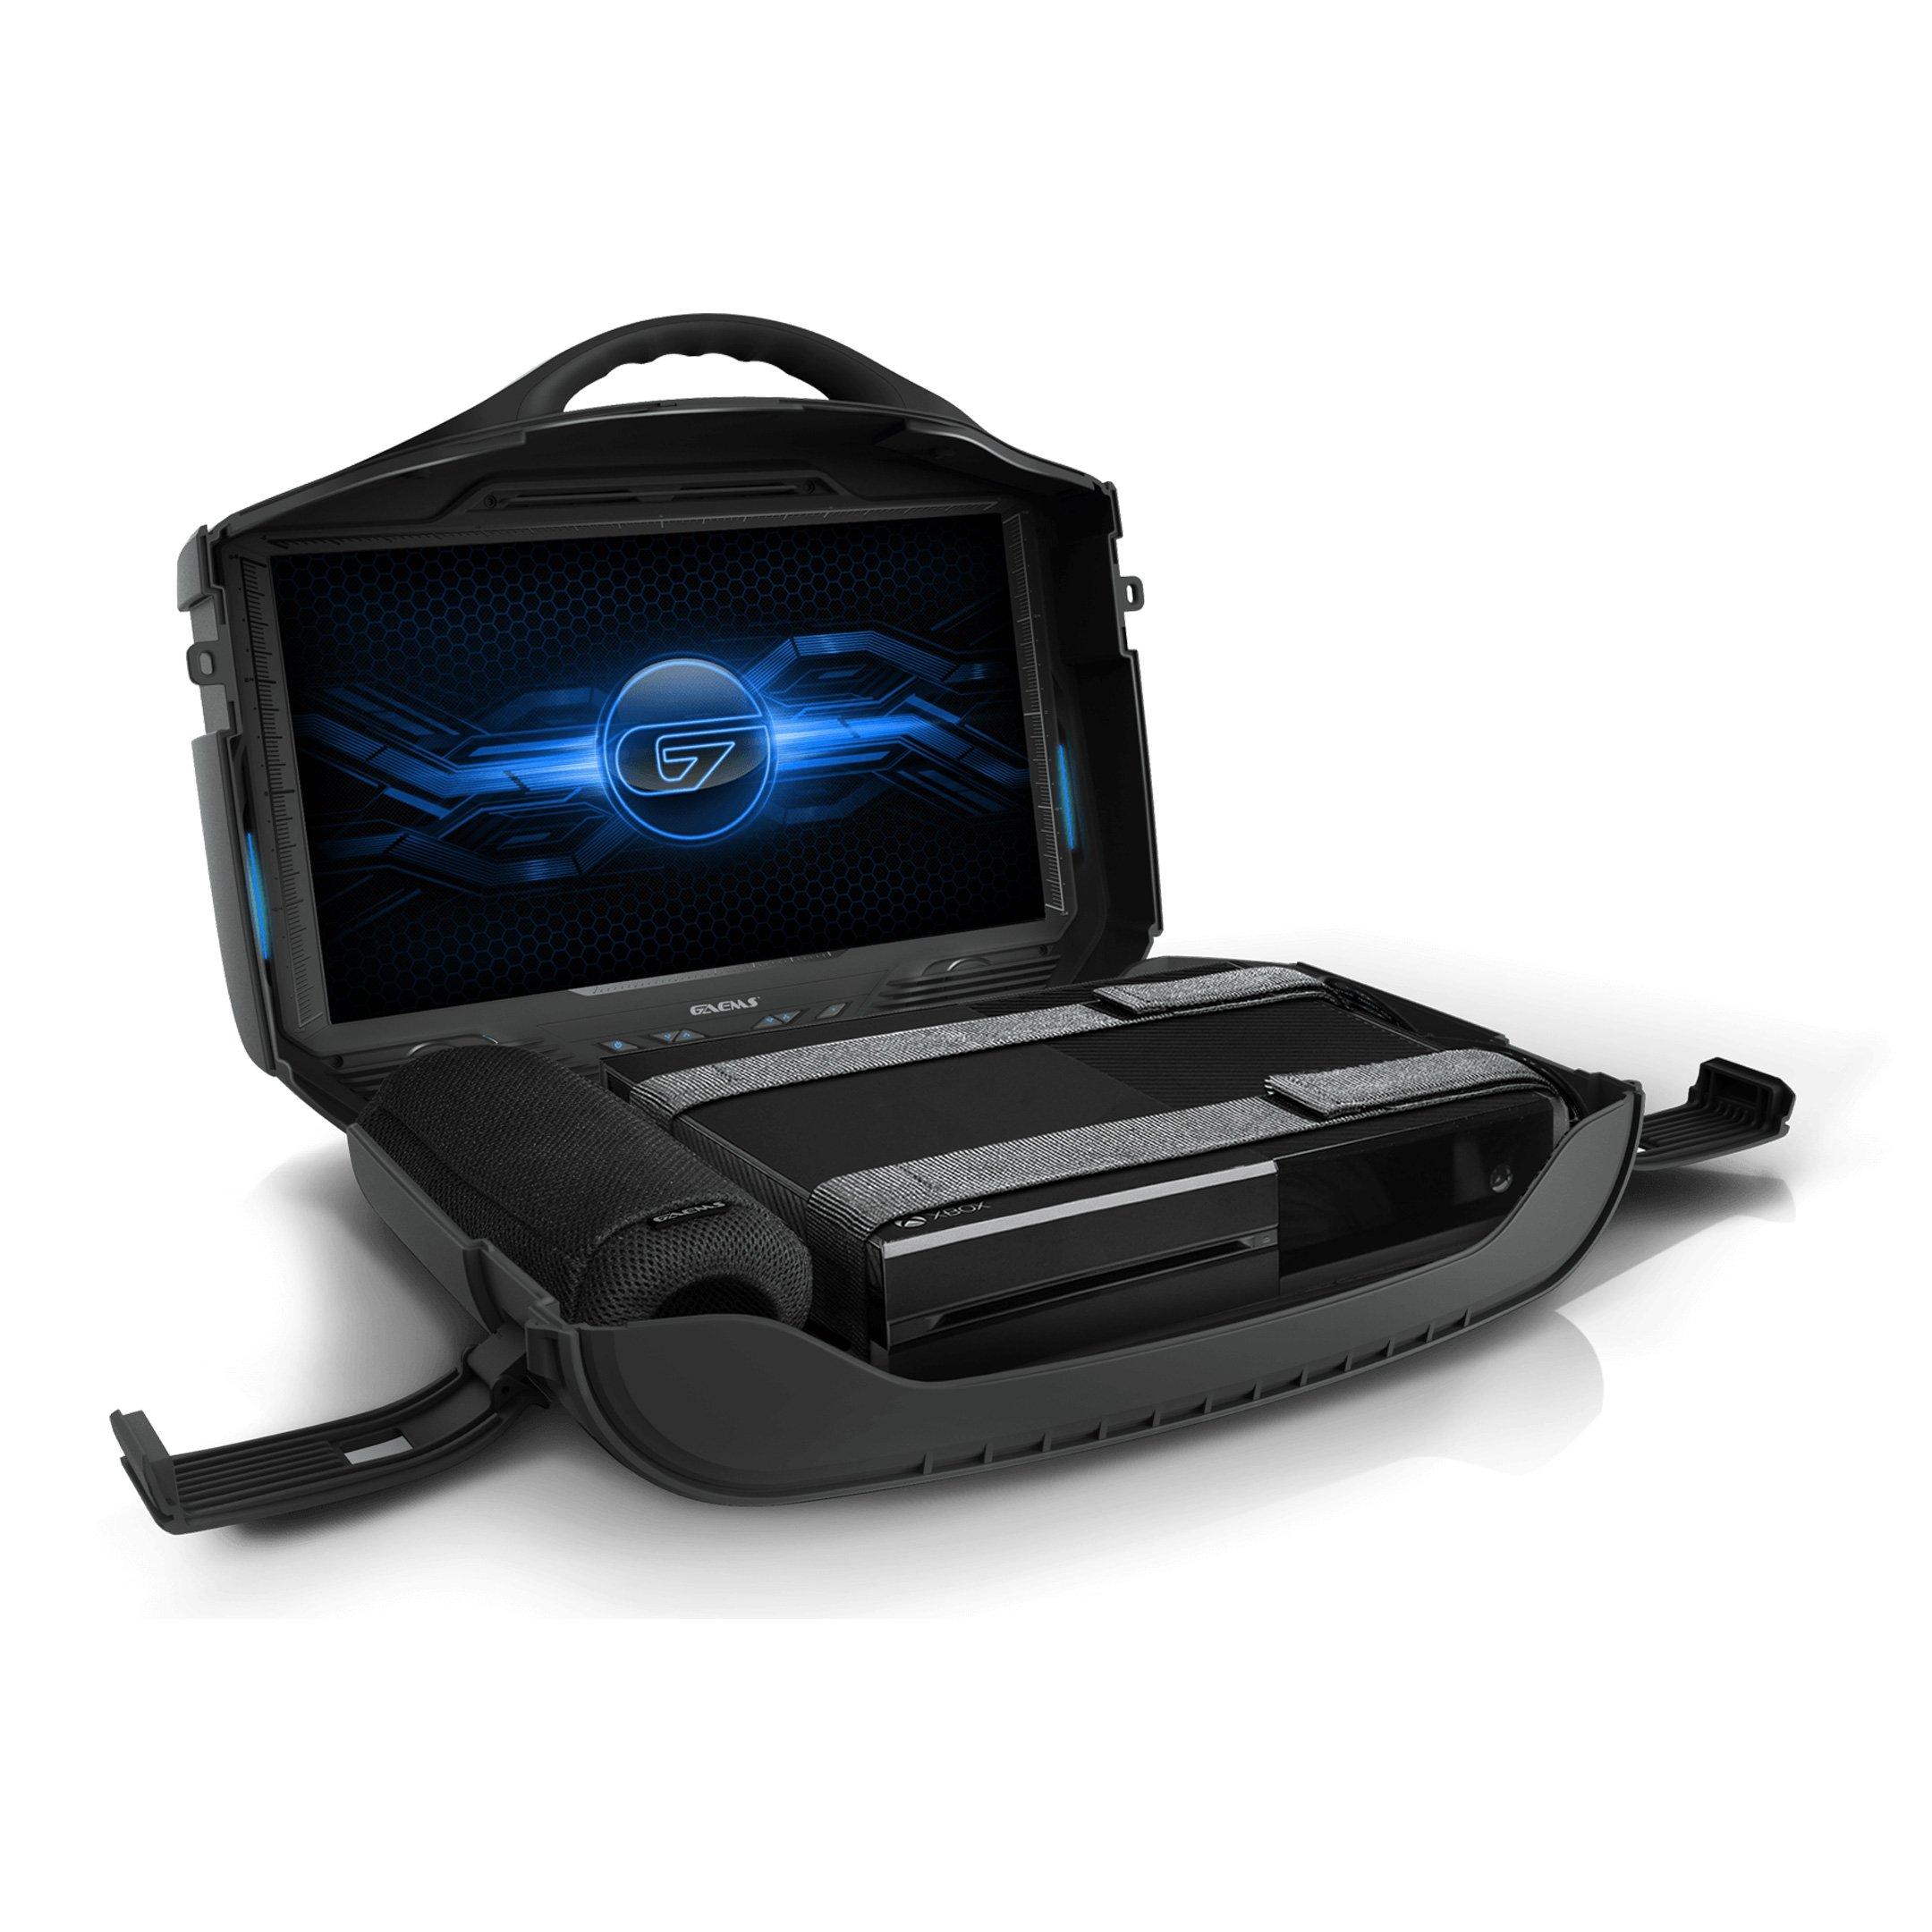 GAEMS M155 Full HD 1080P Portable Gaming Monitor for PS5, PS4